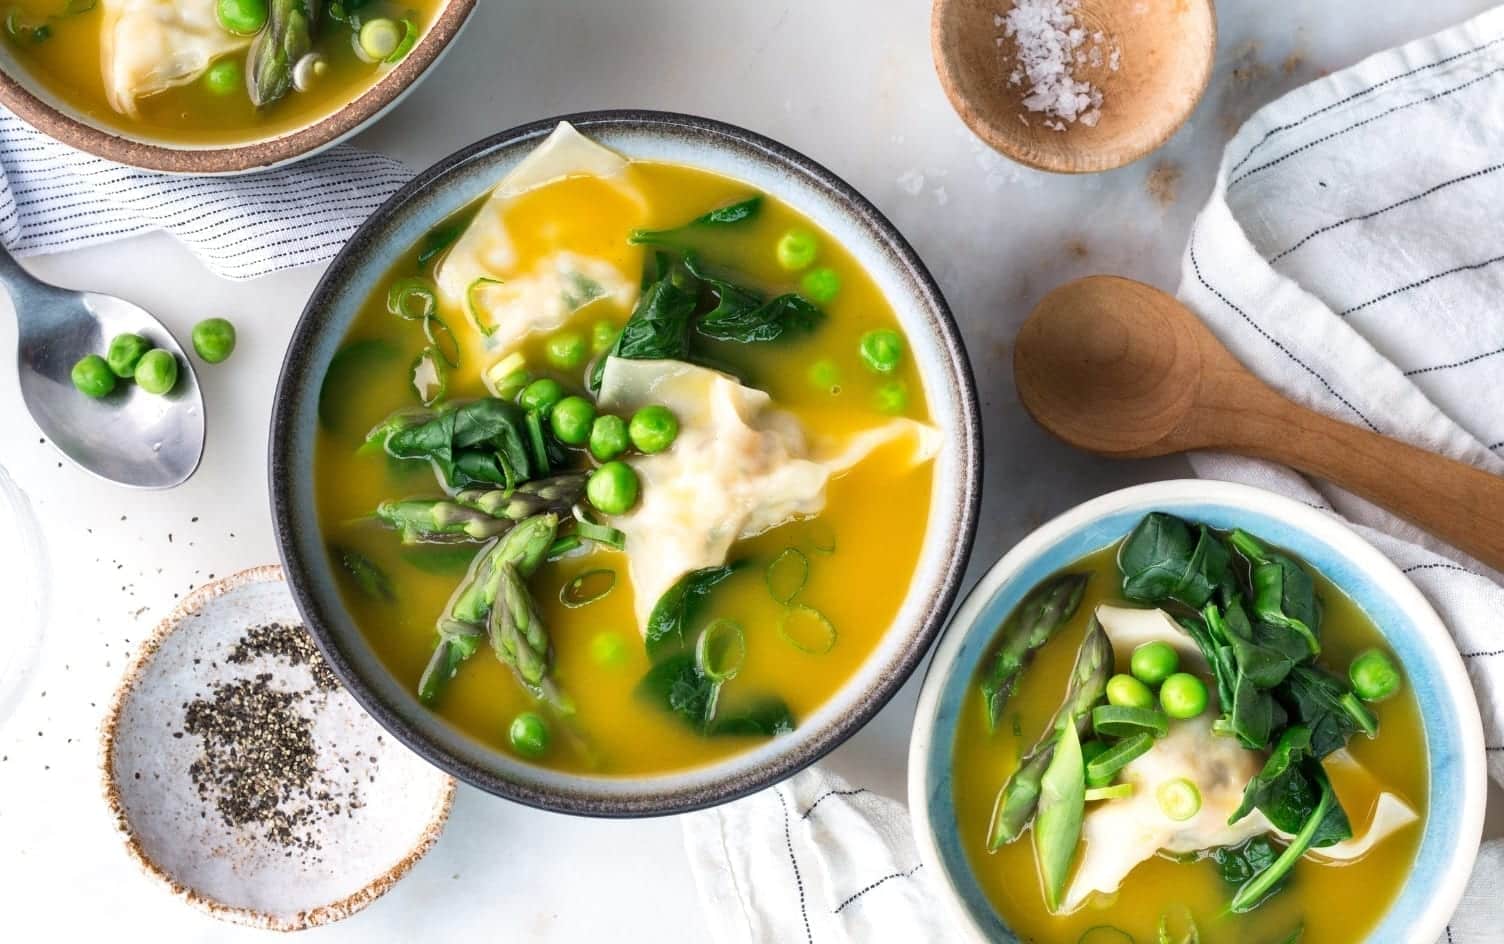 Shrimp Wonton Soup With Ginger and Spring Veggies